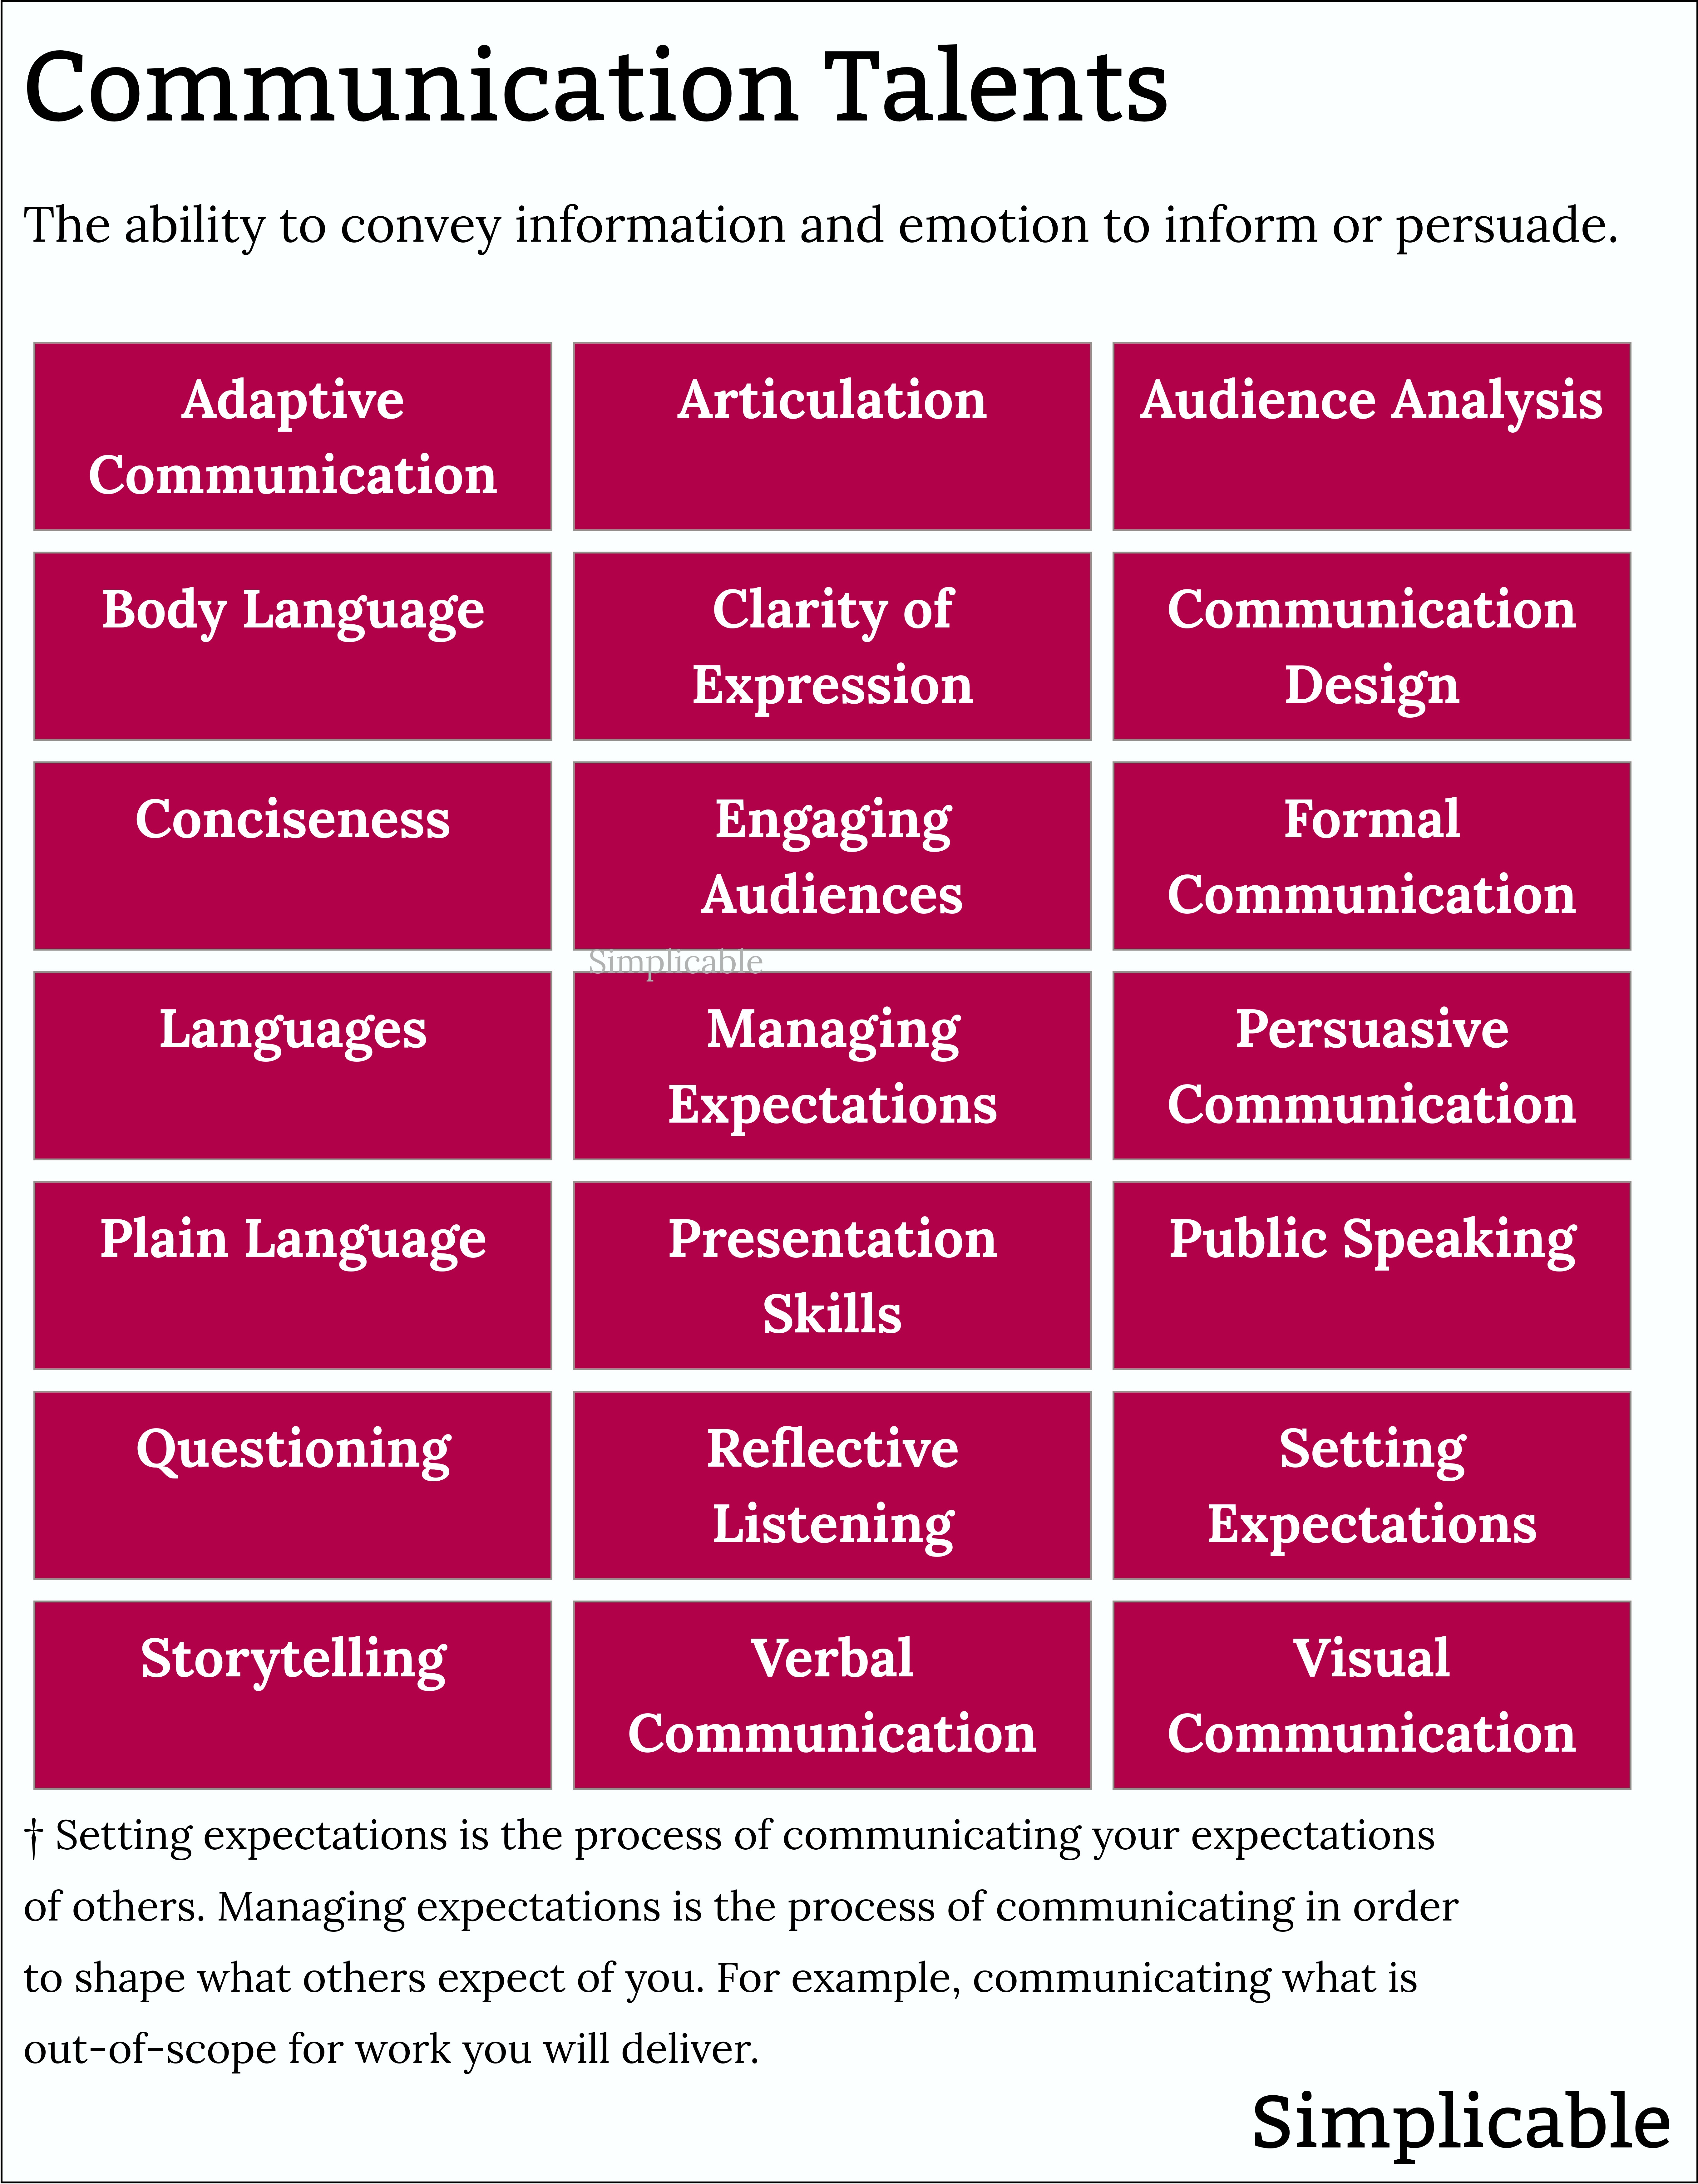 types of communication talents